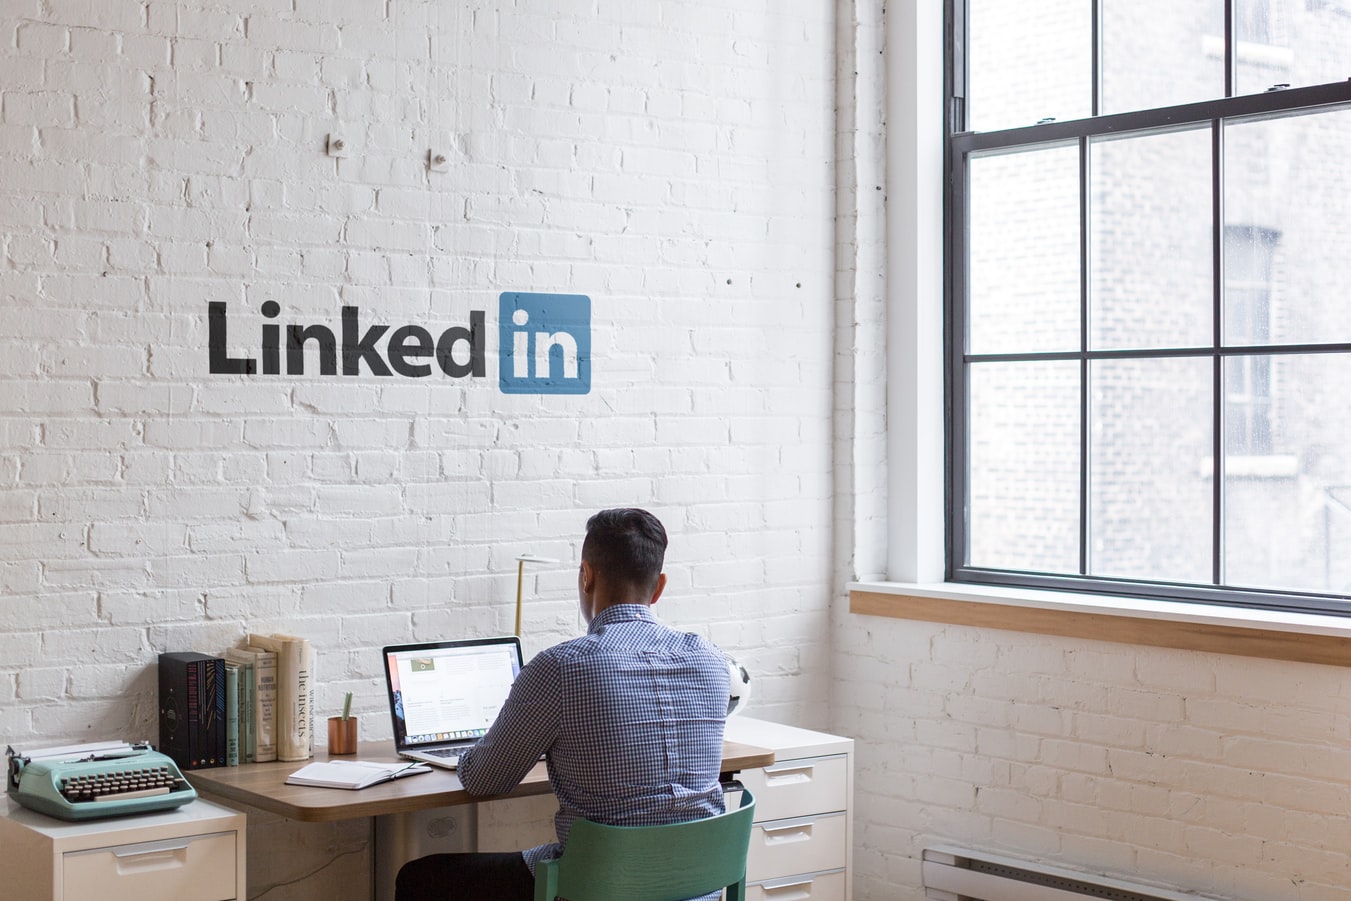 Capitas will now be providing market insights on our Company LinkedIn page. Reach out to discuss how we can support your energy needs.